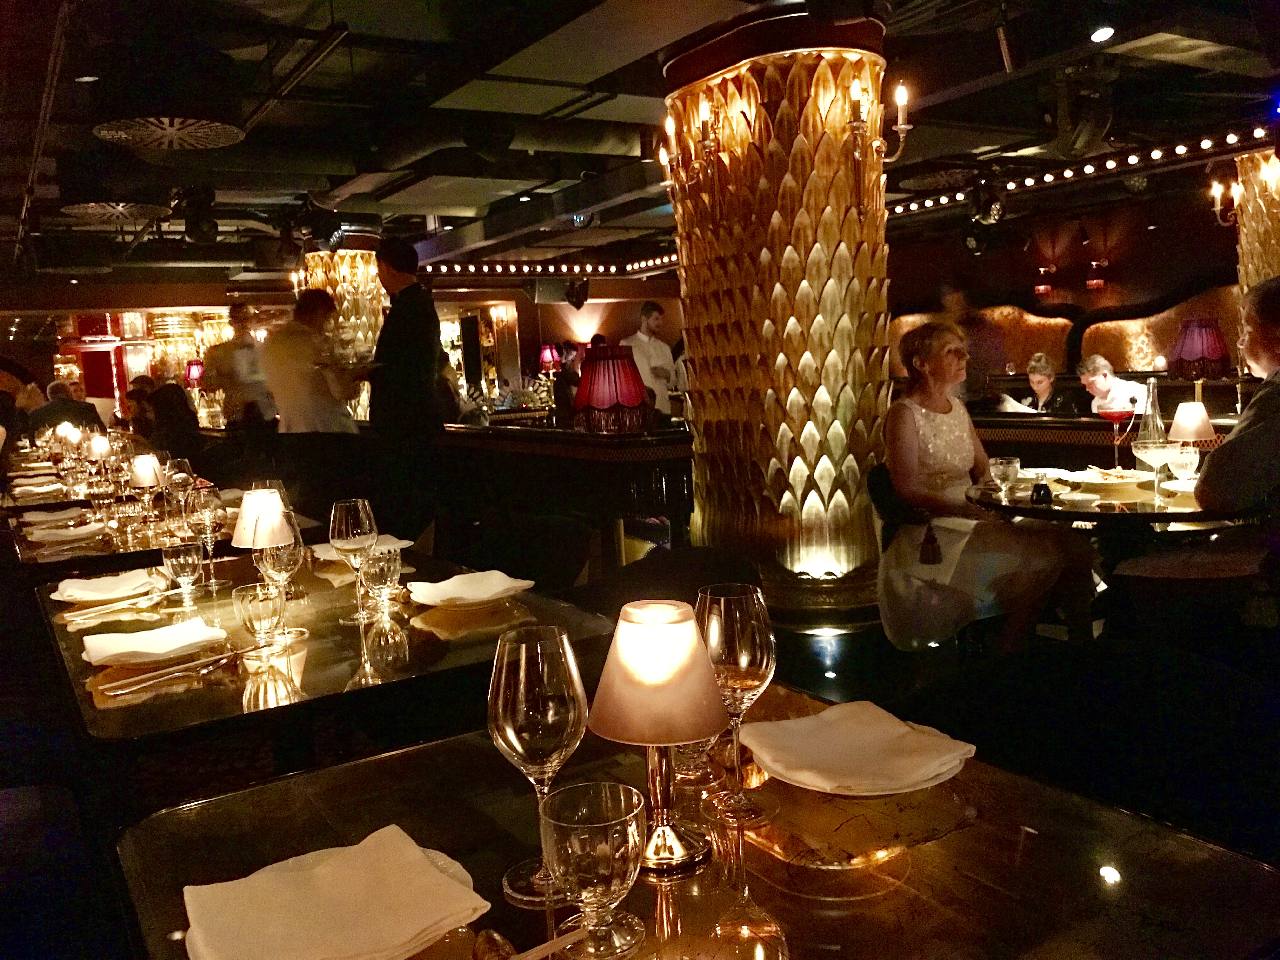 Gold columns in dimly lit dining environment at Club Chinoise, Mayfair